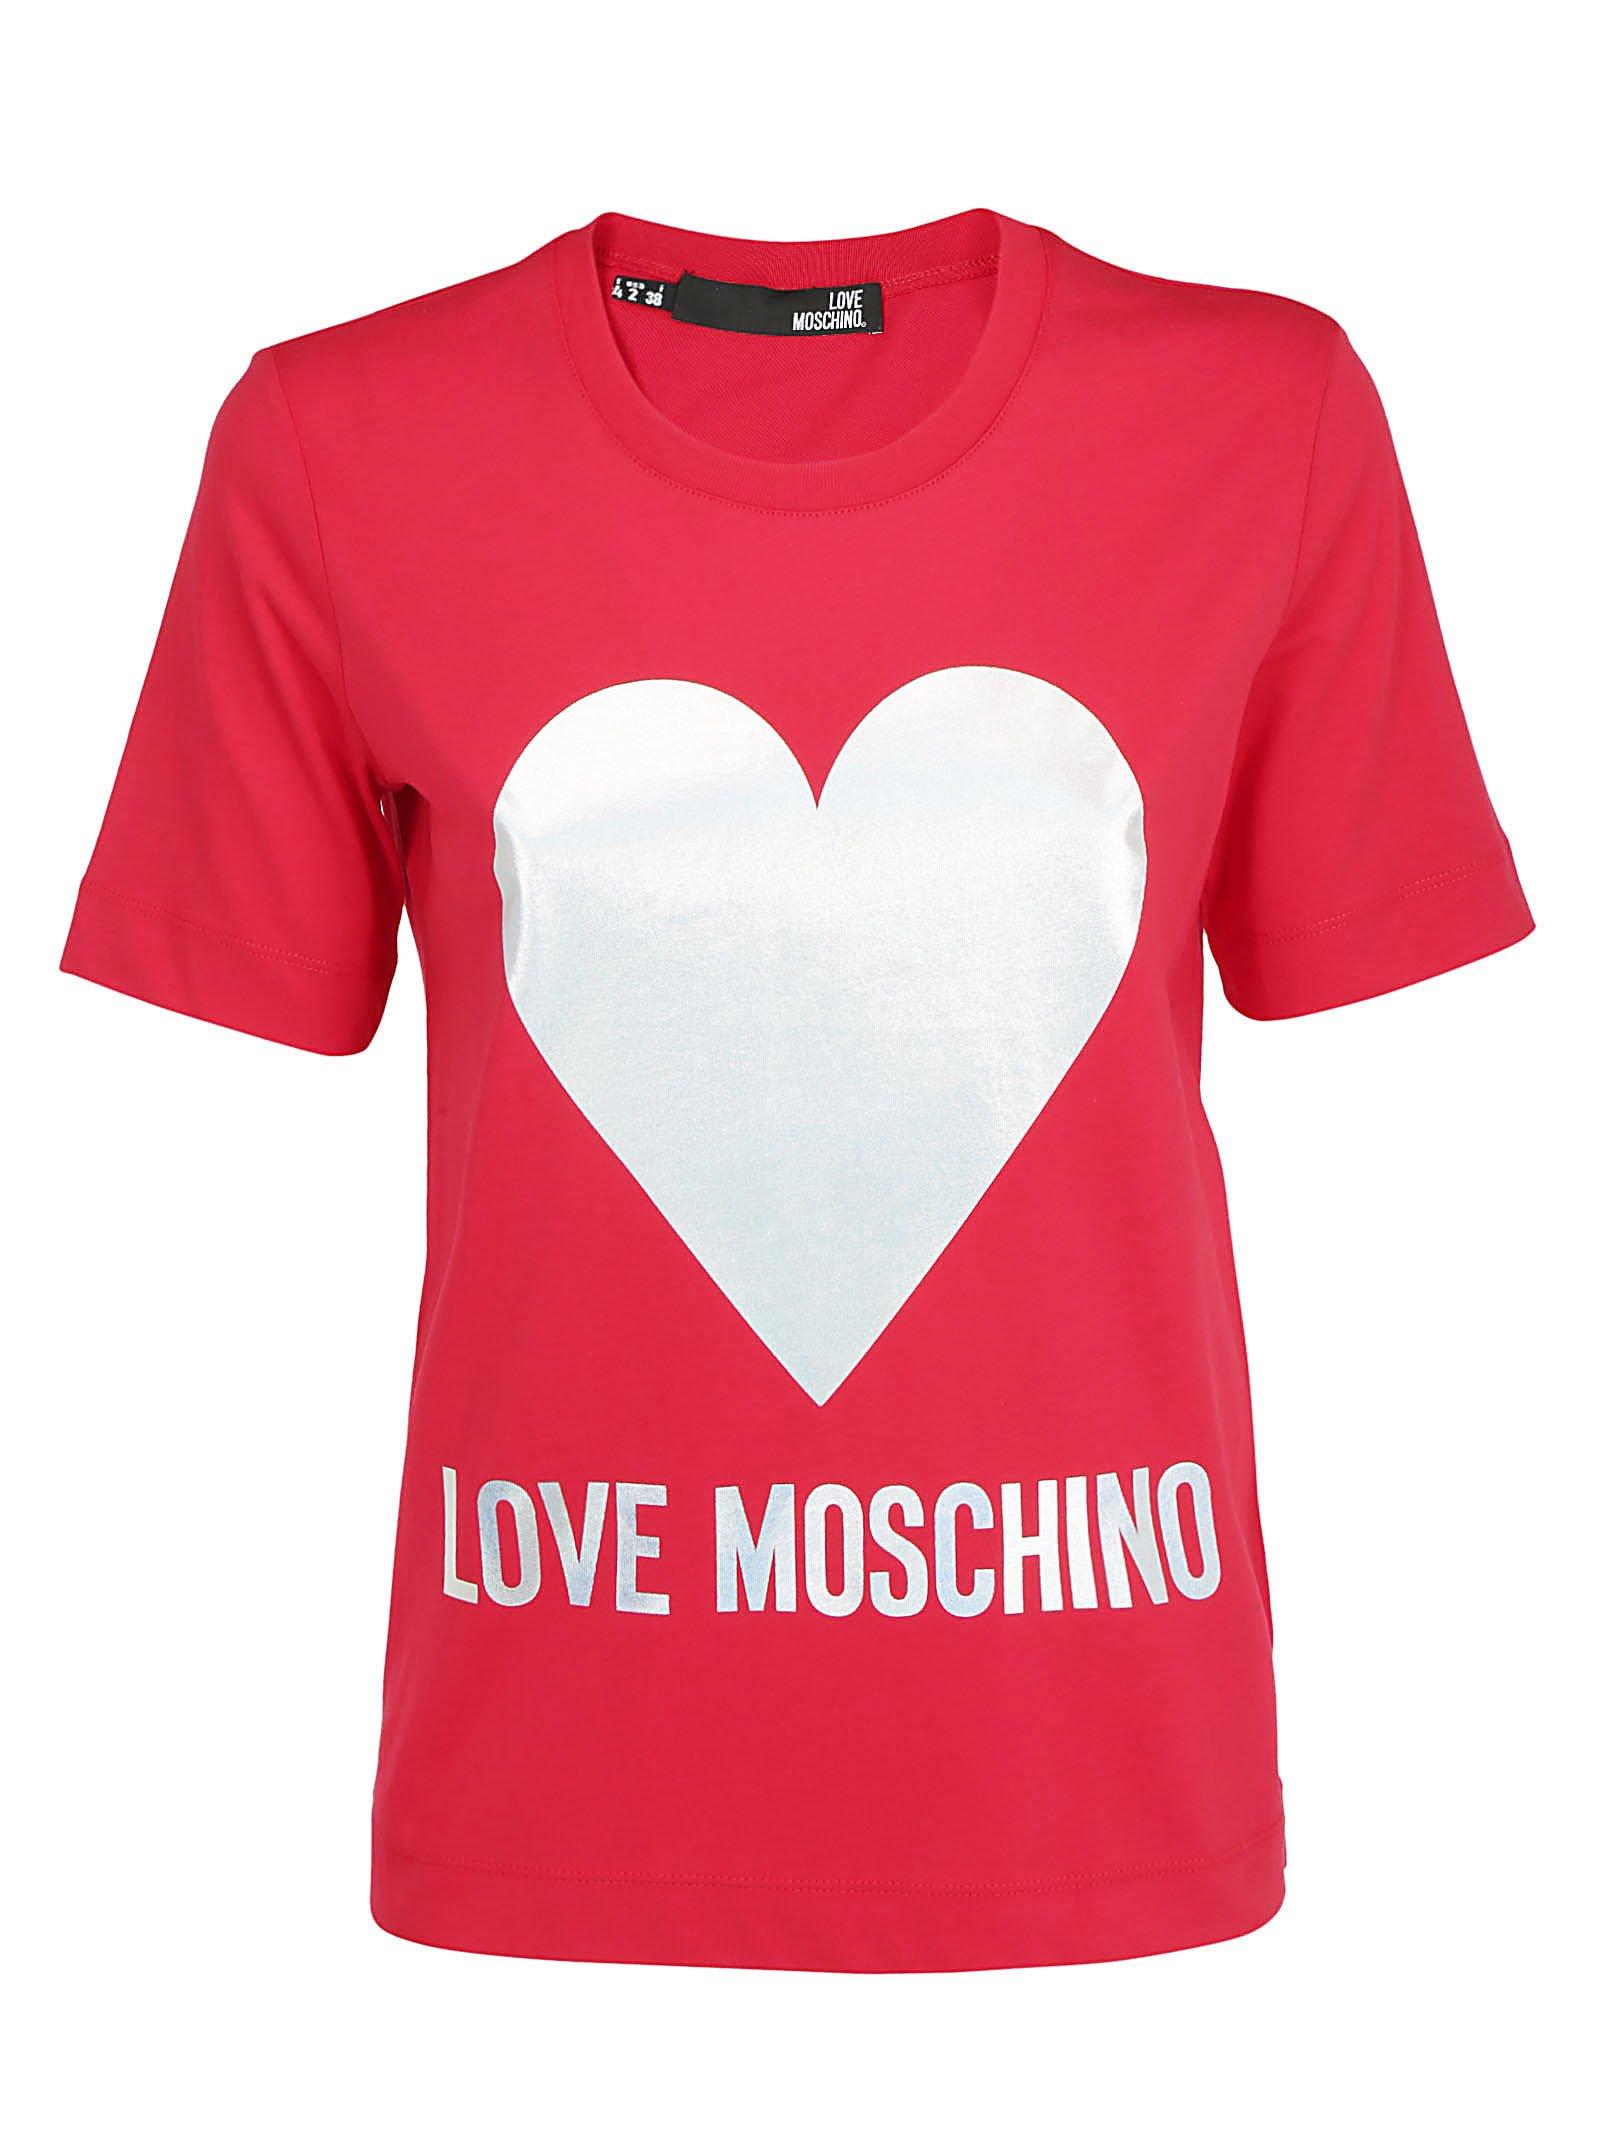 Love Moschino Cotton Heart Logo Print T-shirt in Red - Save 9% - Lyst